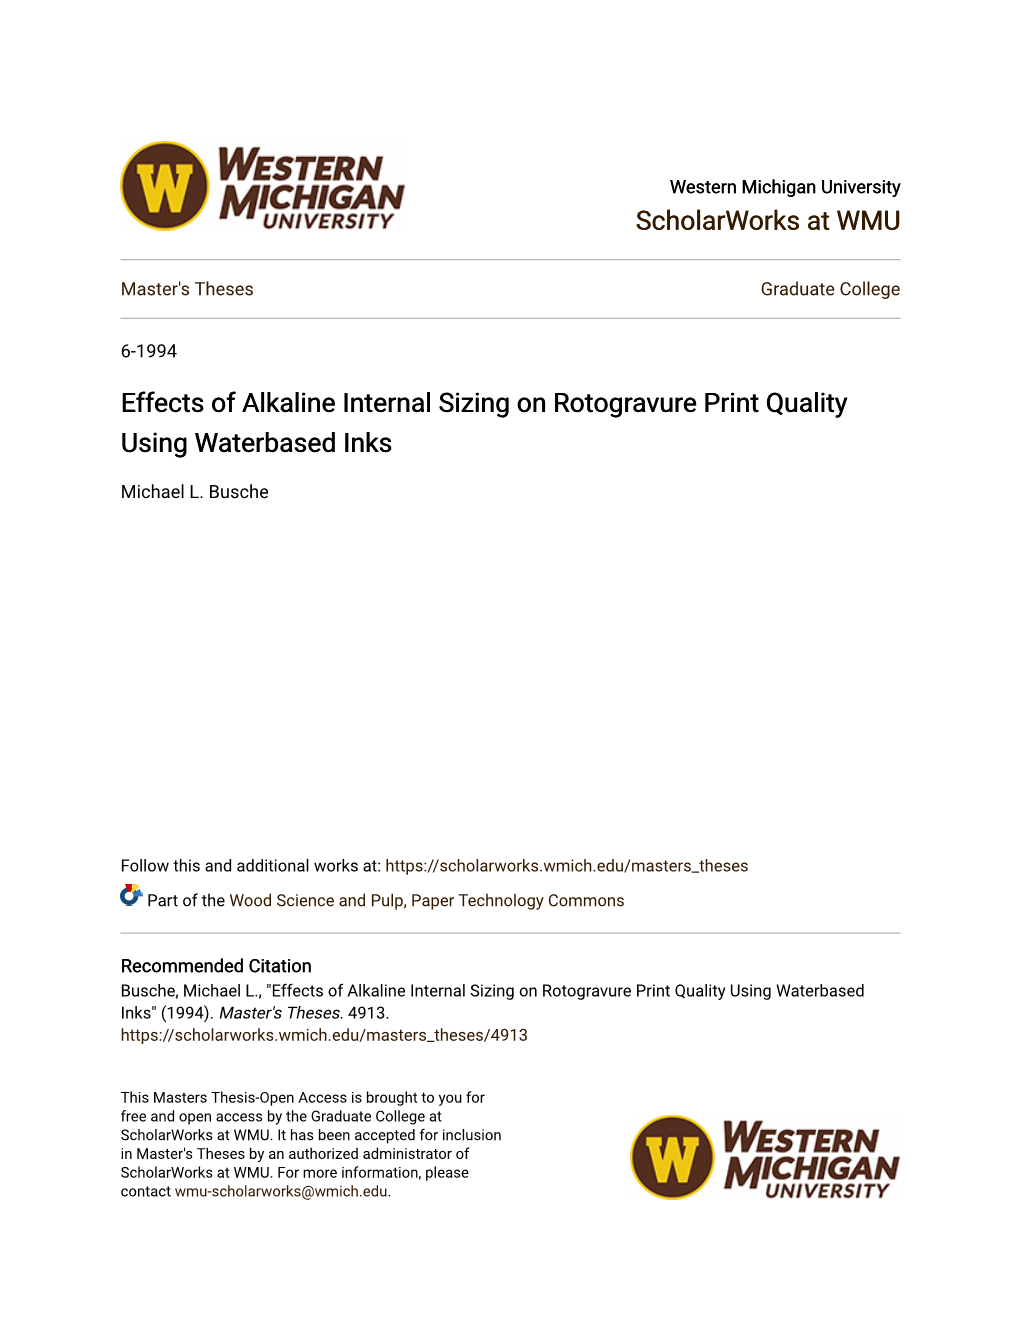 Effects of Alkaline Internal Sizing on Rotogravure Print Quality Using Waterbased Inks